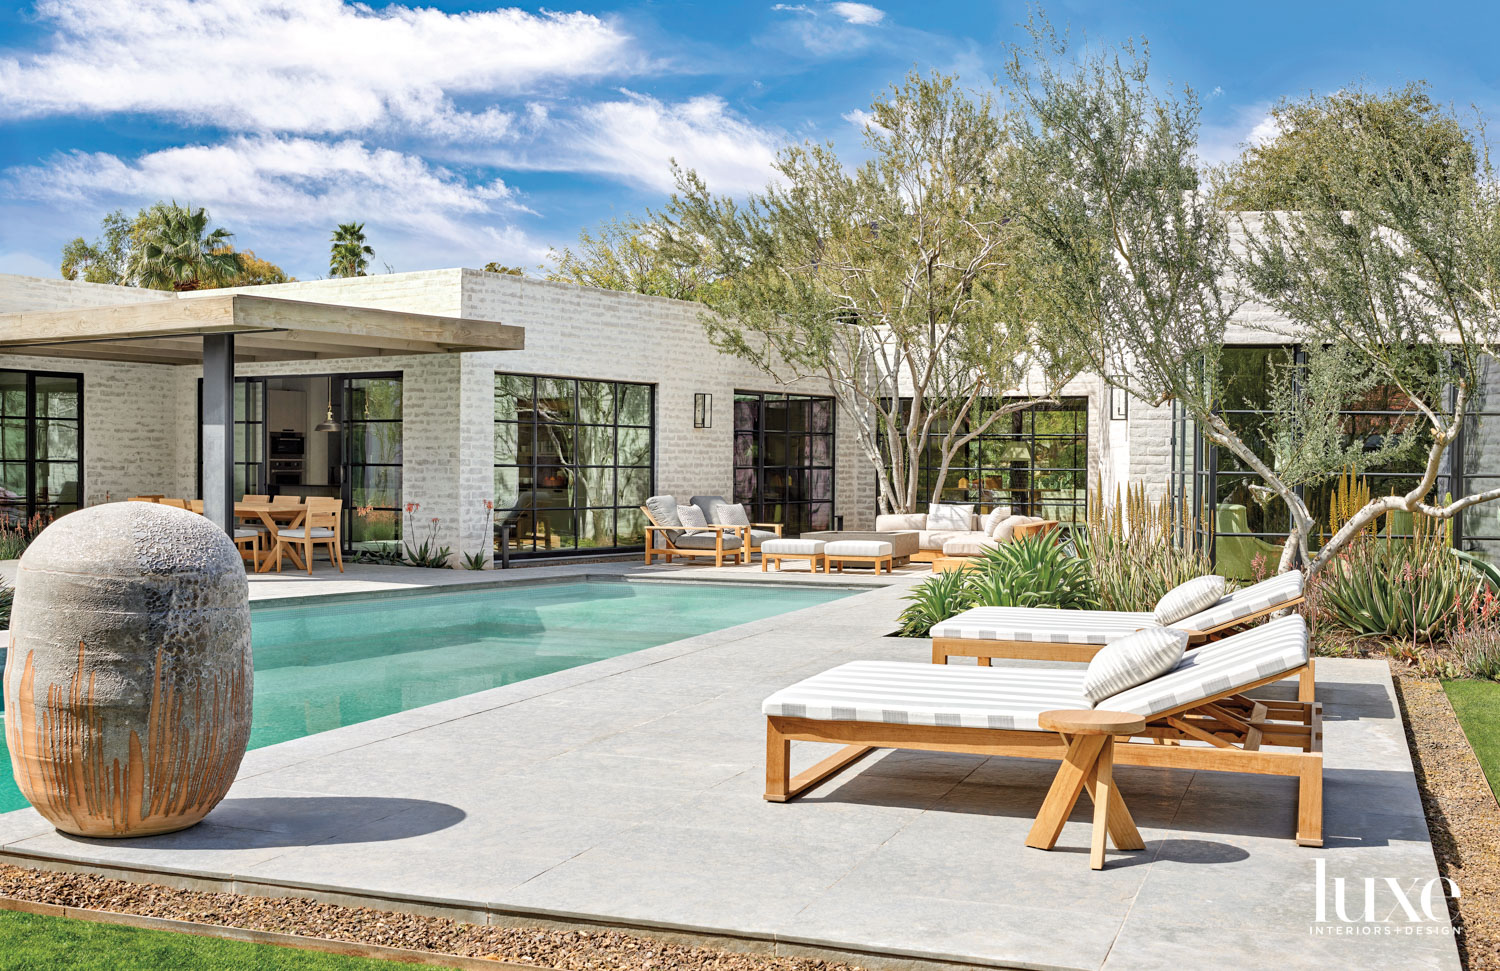 A poolside patio with gray-and-white...